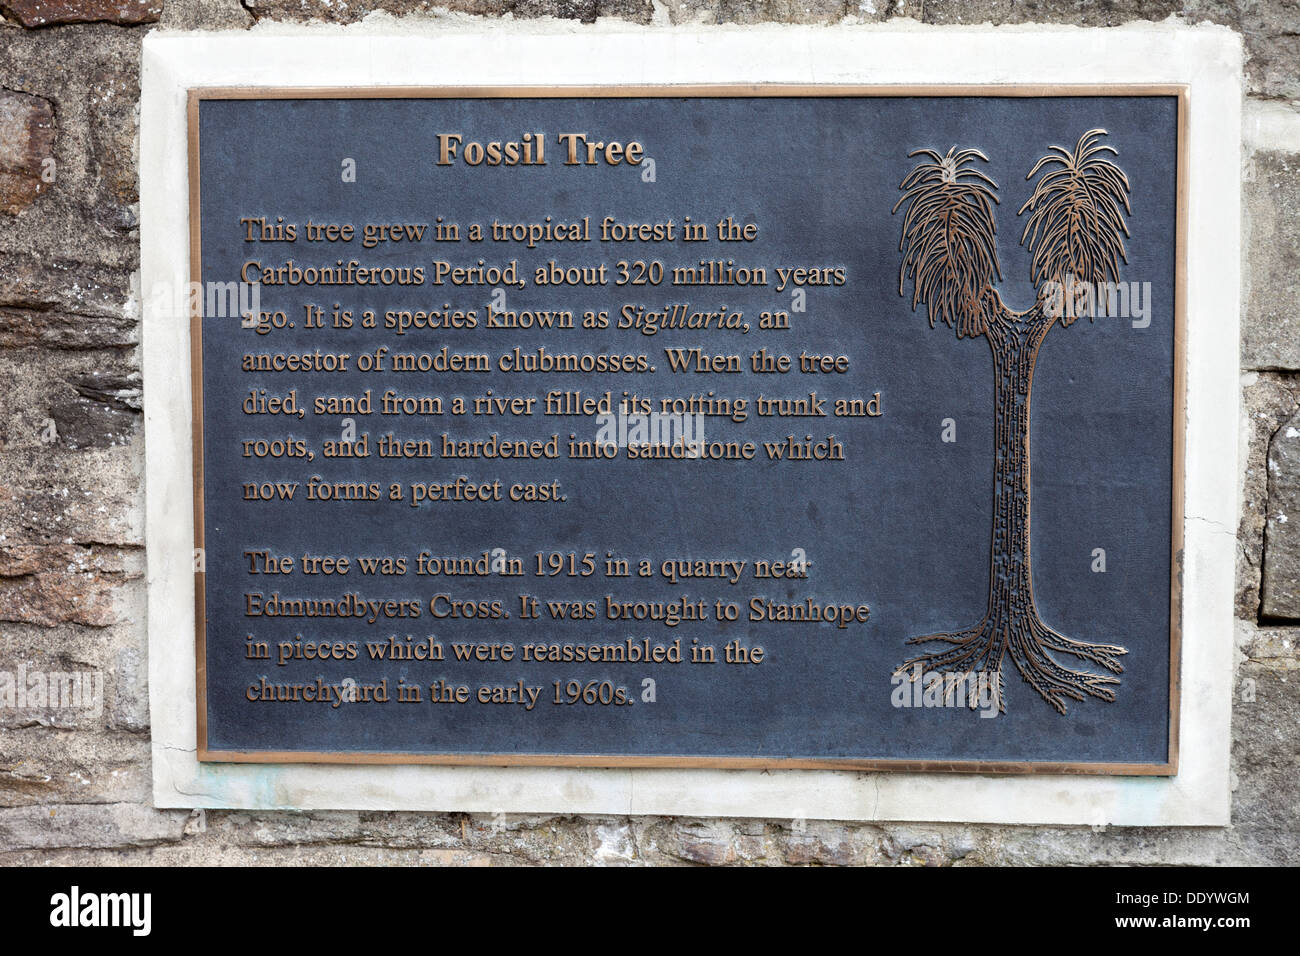 Sign for the Fossil Tree (Sigillarai species) in the Village of Stanhope Weardale County Durham UK Stock Photo